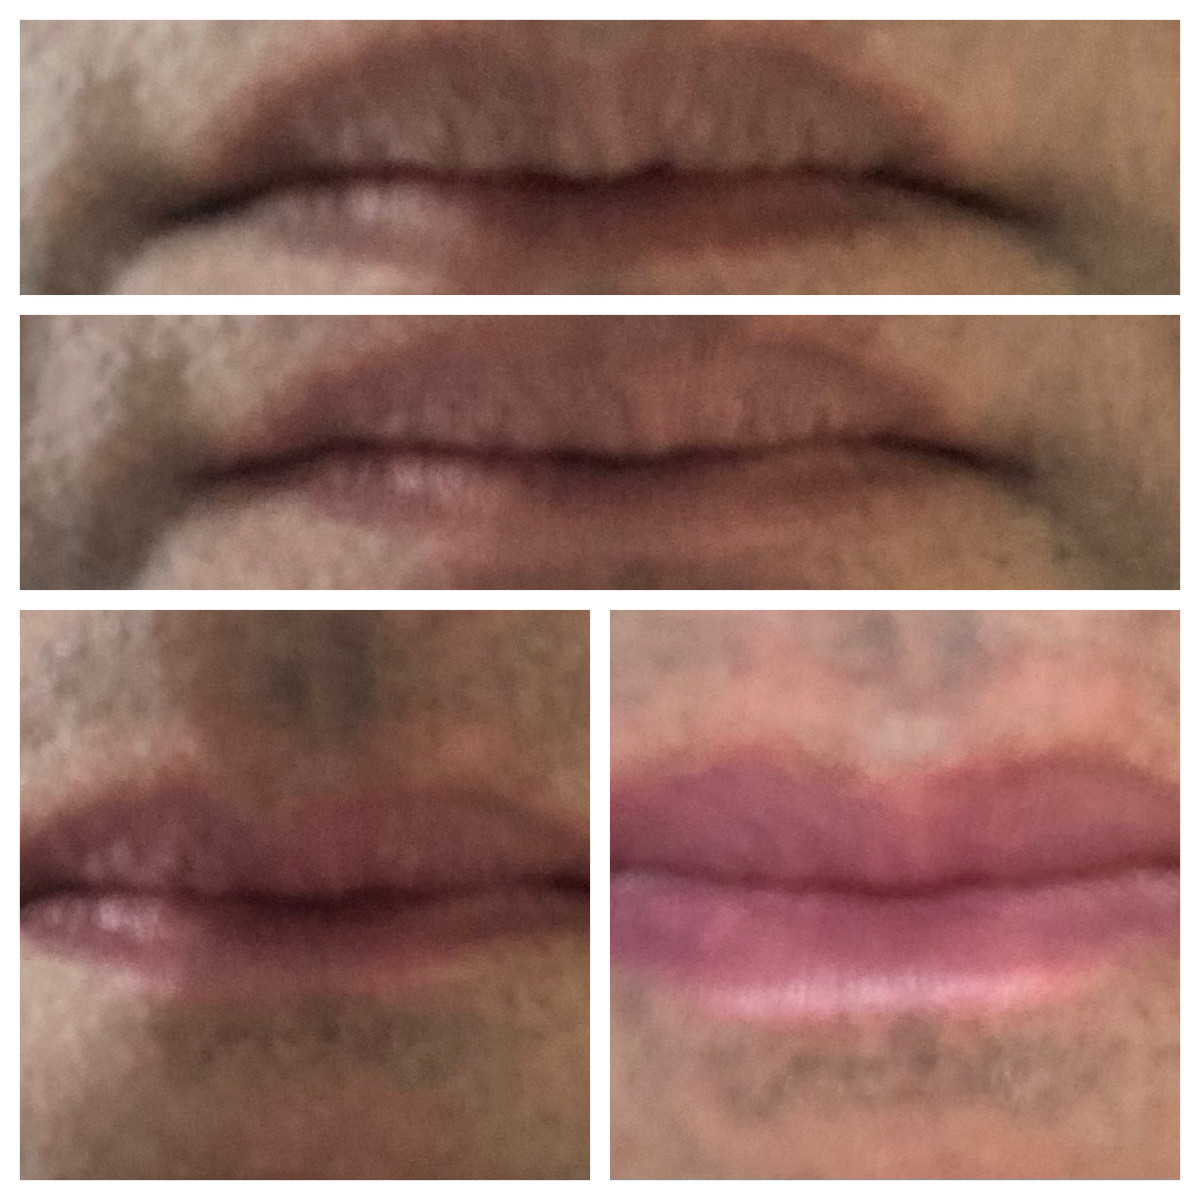 Top no lipstick.  Middle, with a matt pale lipstick.  Bottom, the pale lipstick overlain with a darker shade to create a blended look.  The lipsticks used are shown above.